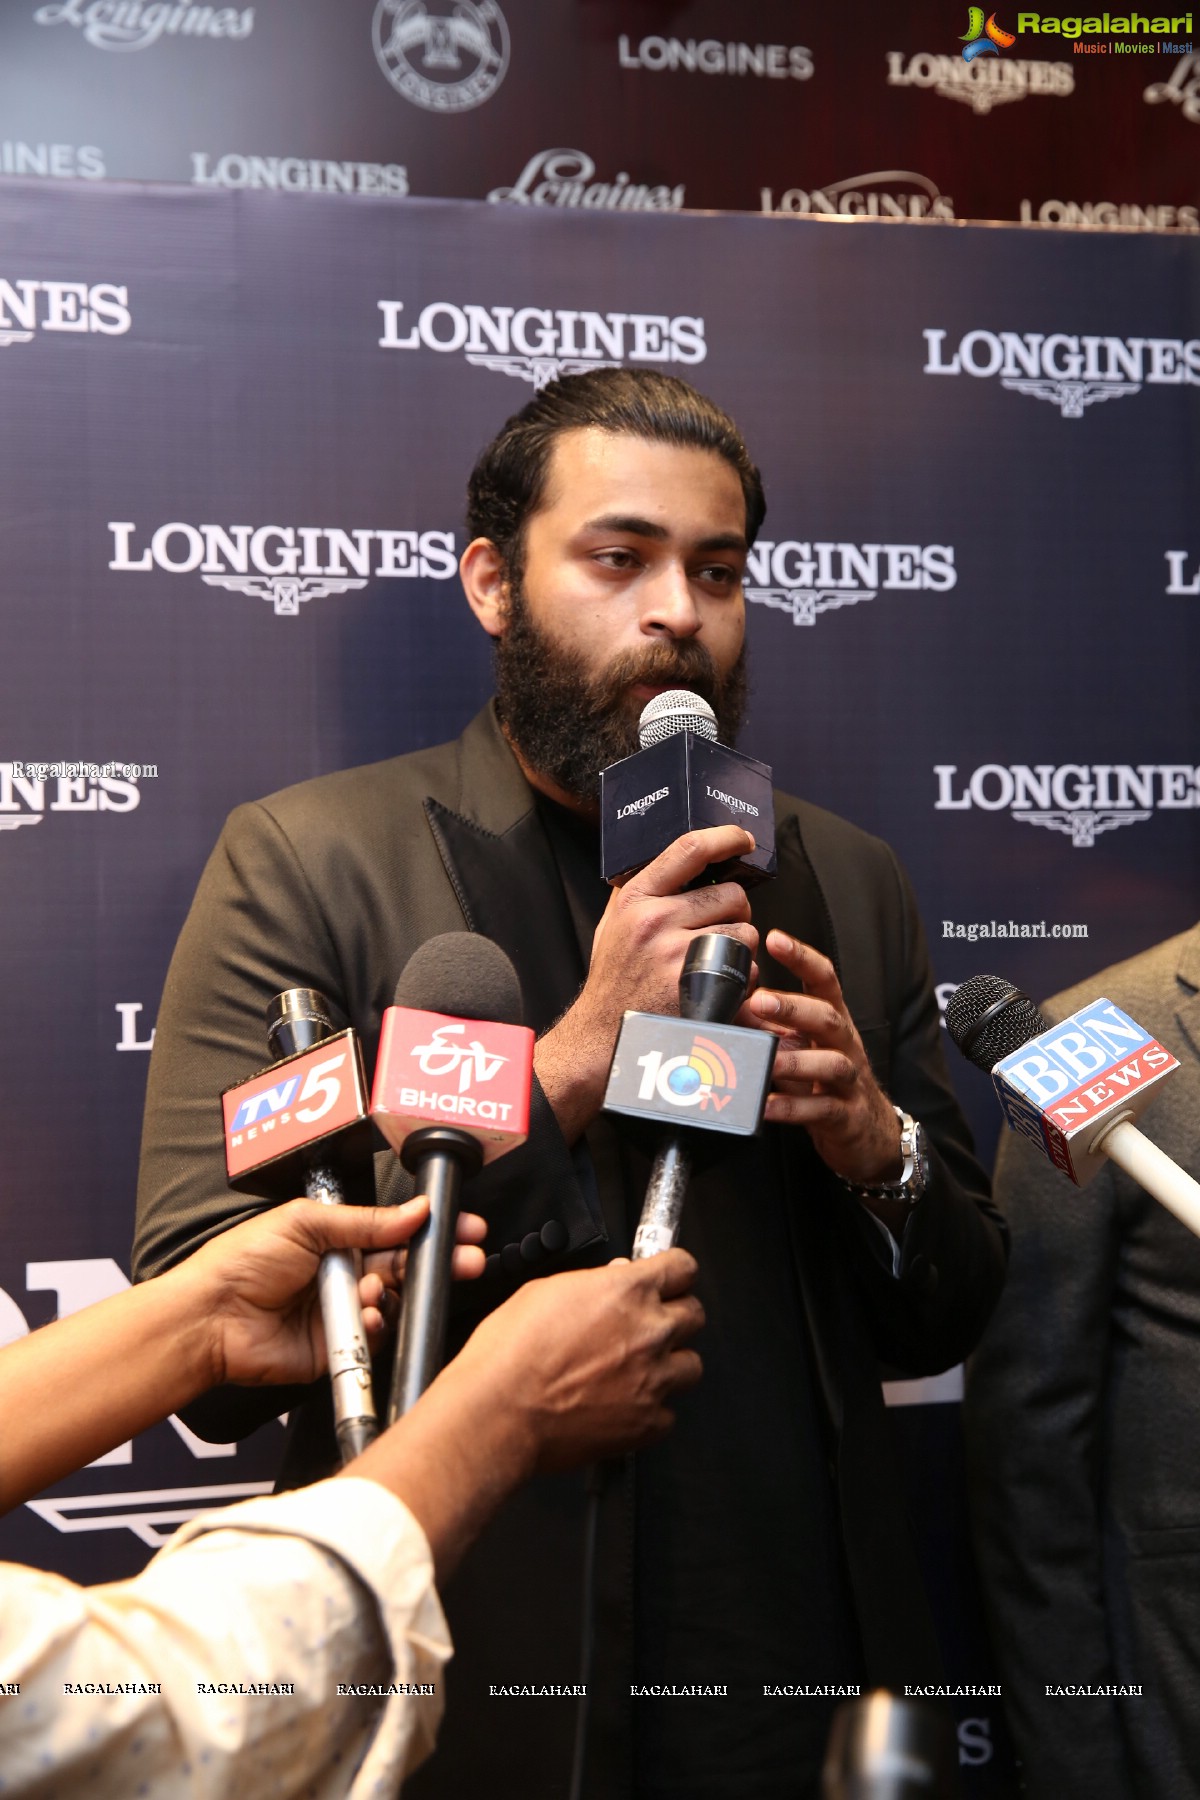 Longines Showcases Its HydroConquest Collection In The Presence of Varun Tej